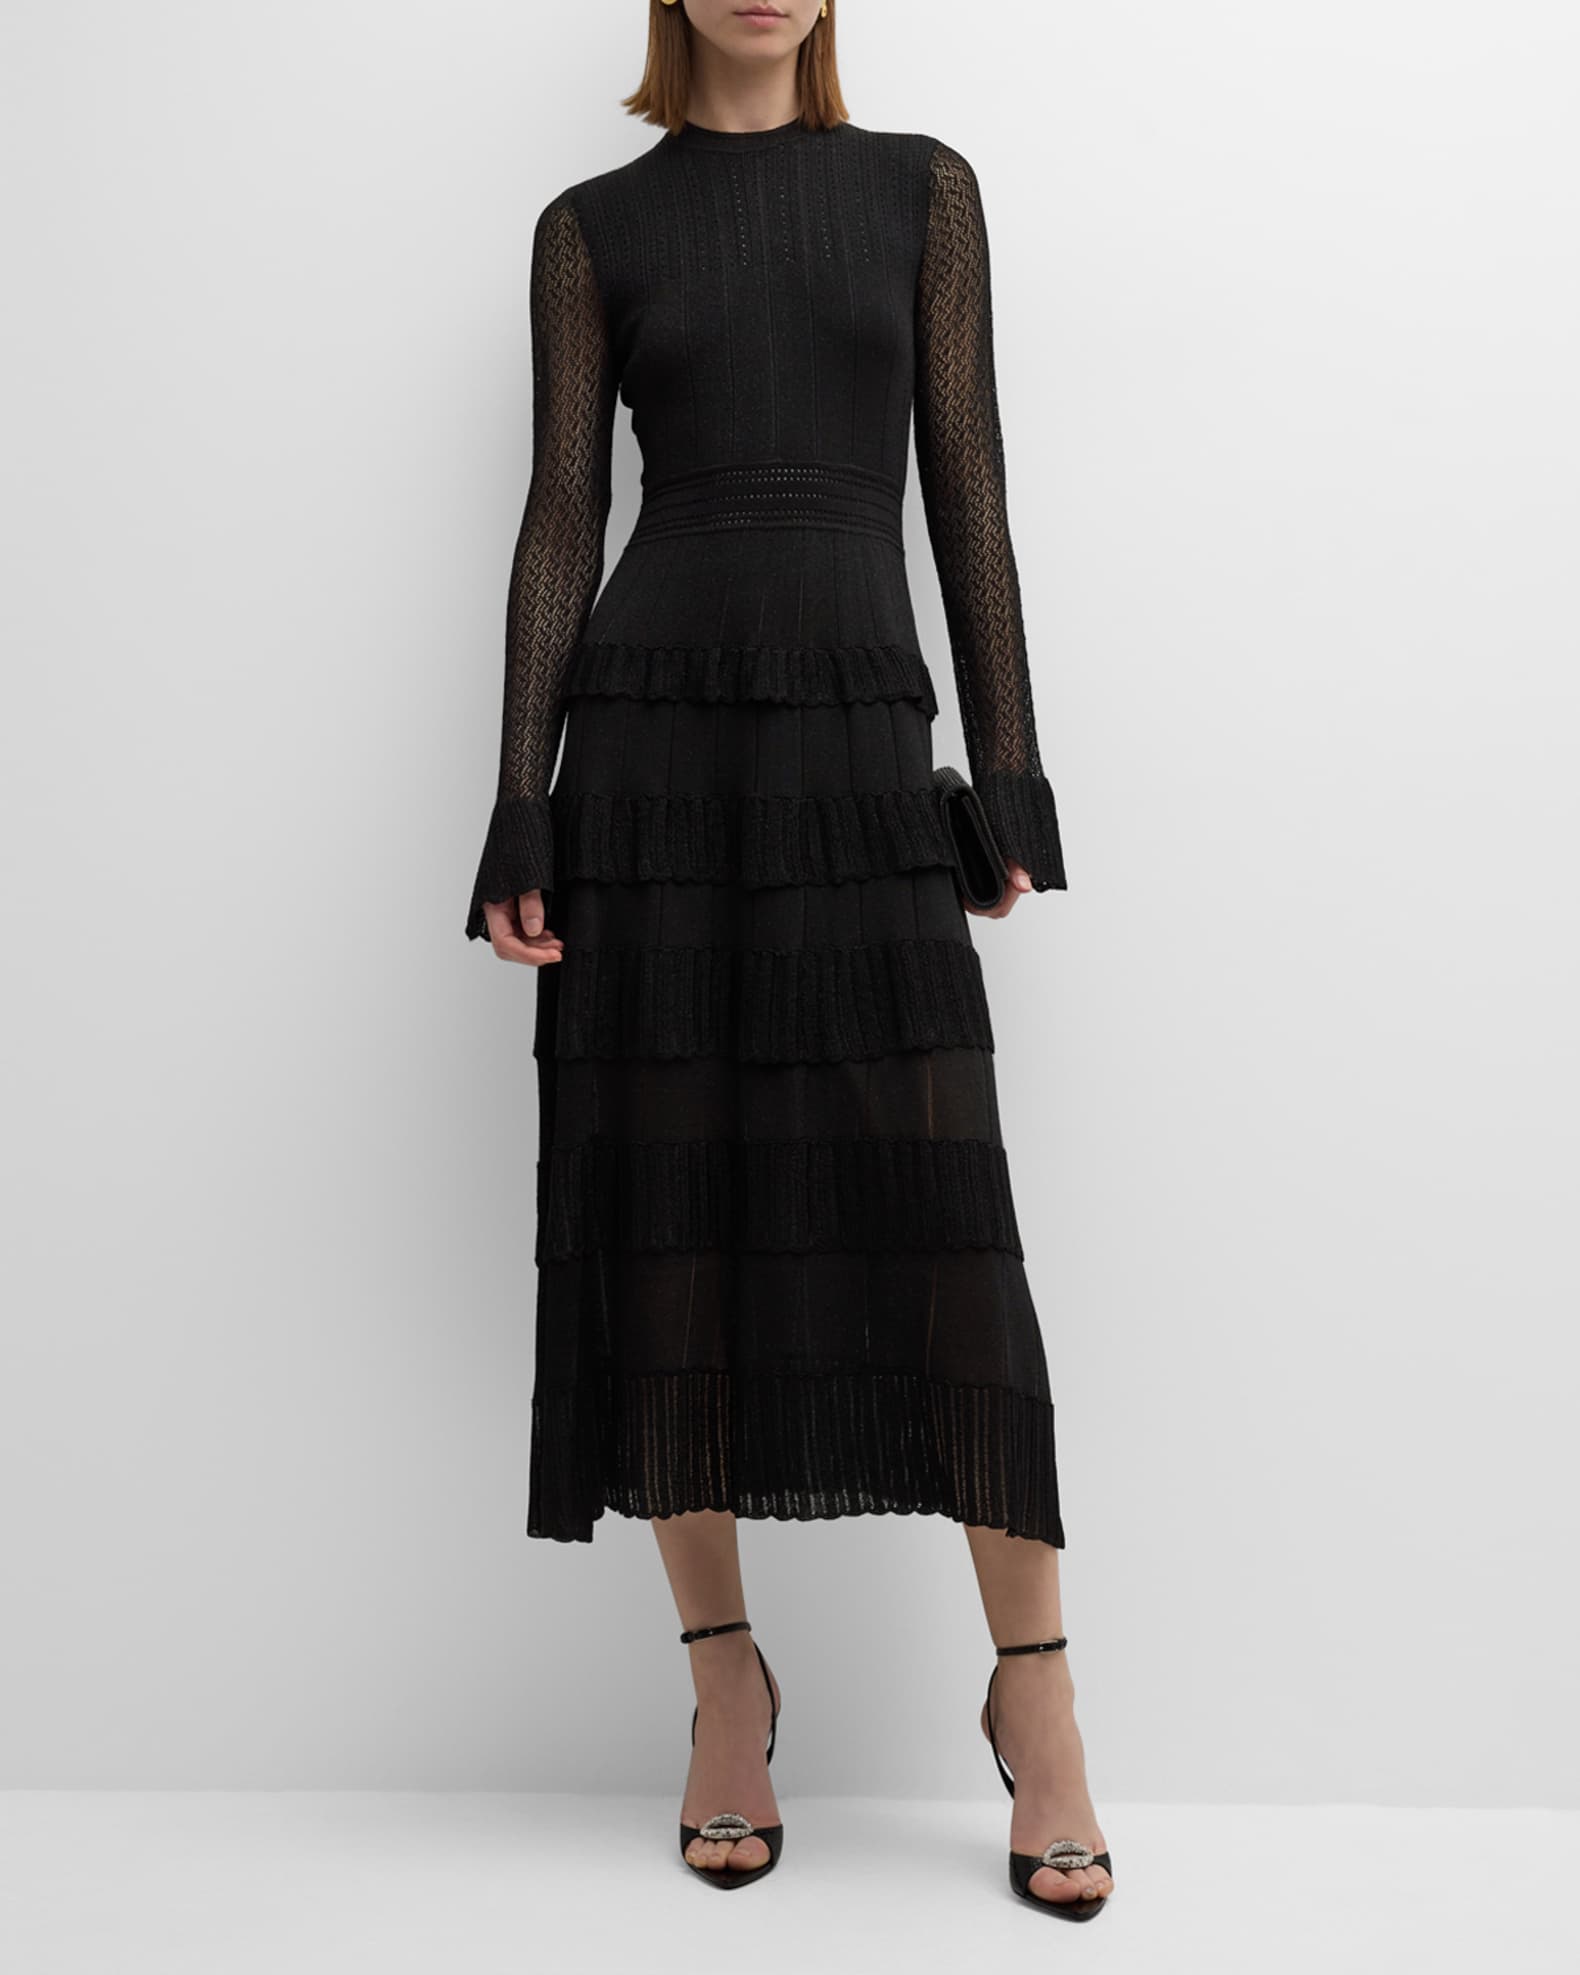 Lela Rose Piper Knit Maxi Dress with Tiered Ruffle Detail | Neiman Marcus